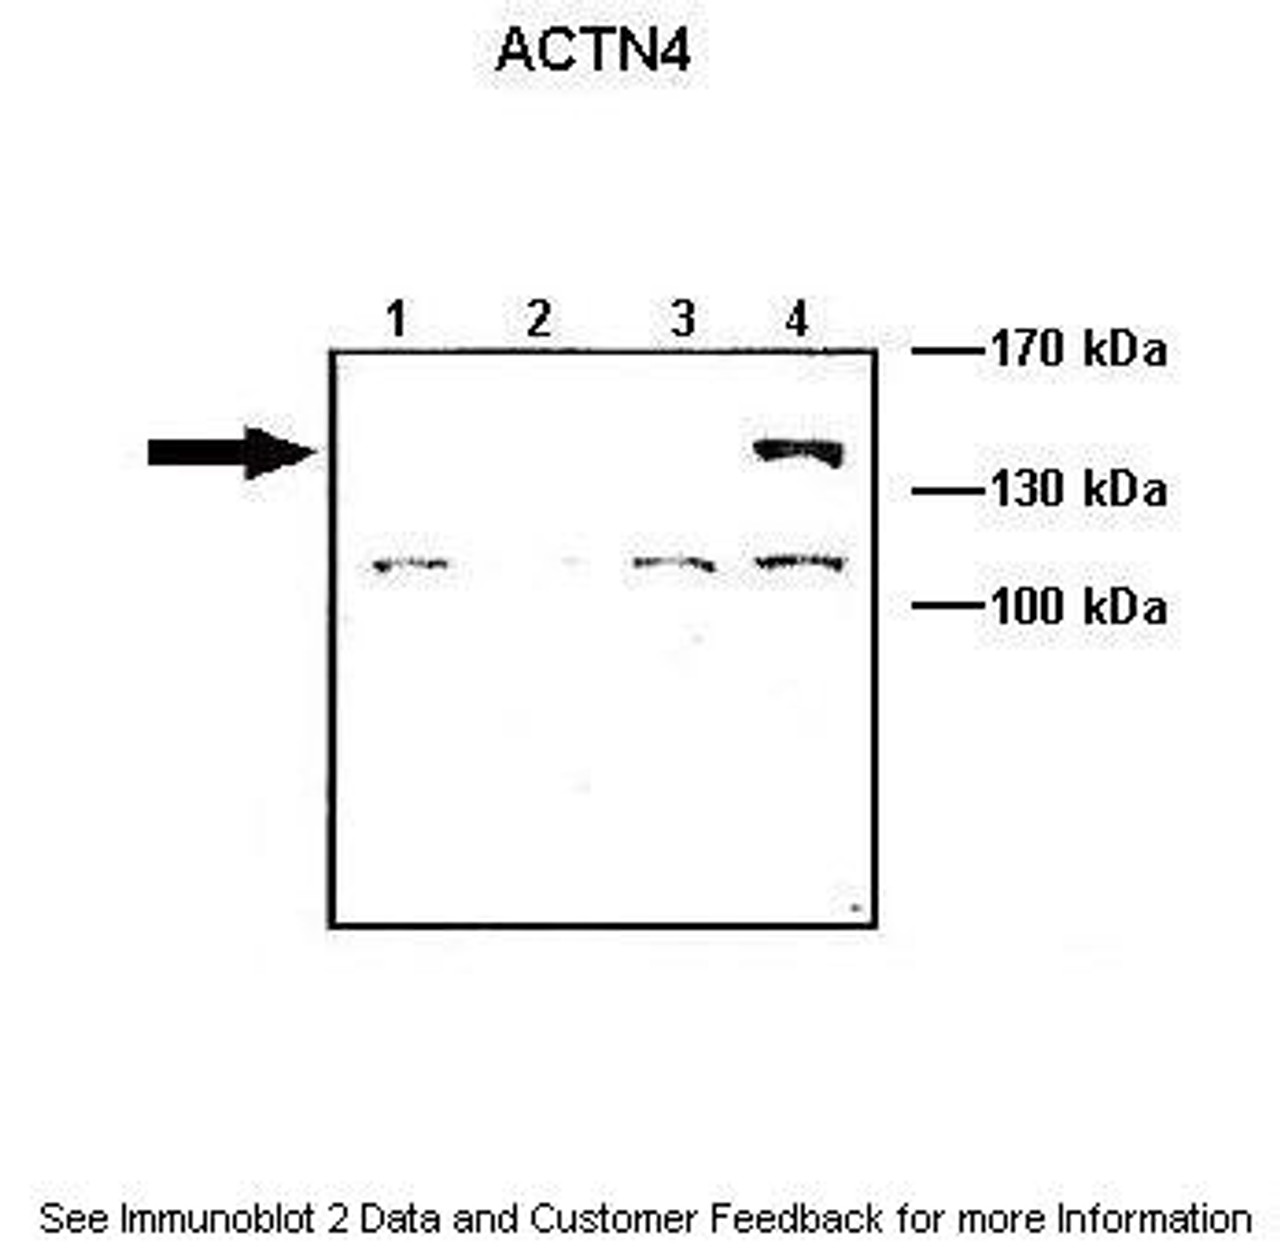 Antibody used in WB on ACTNX-GFP transfected at: 1:1000 (Lane1: 10 ug ACTN1-GFP transfected COS-7 lysate, Lane2: 10 ug ACTN2-GFP transfected COS-7 lysate, Lane3: 10 ug ACTN3-GFP transfected COS-7 lysate, Lane4: 10 ug ACTN4-GFP transfected COS-7 lysate) .